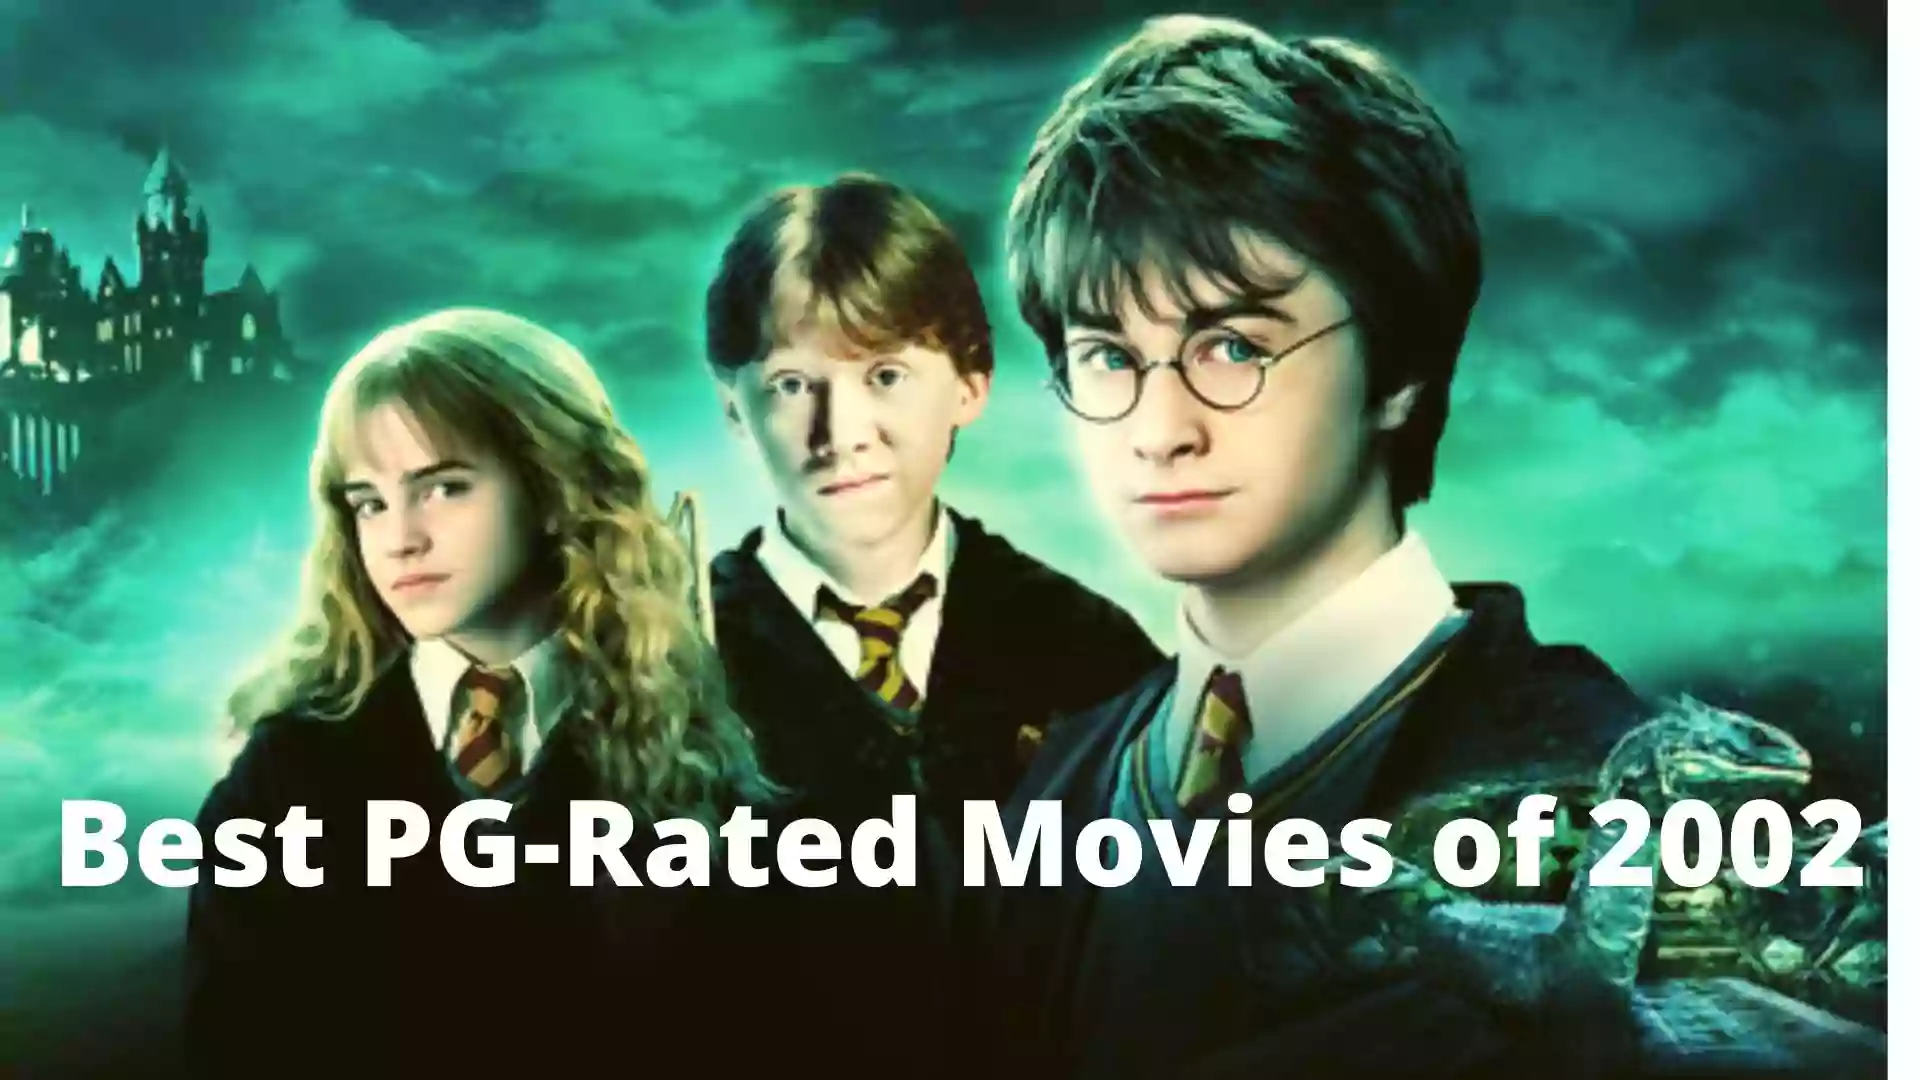 Best PG-Rated Movies of 2002